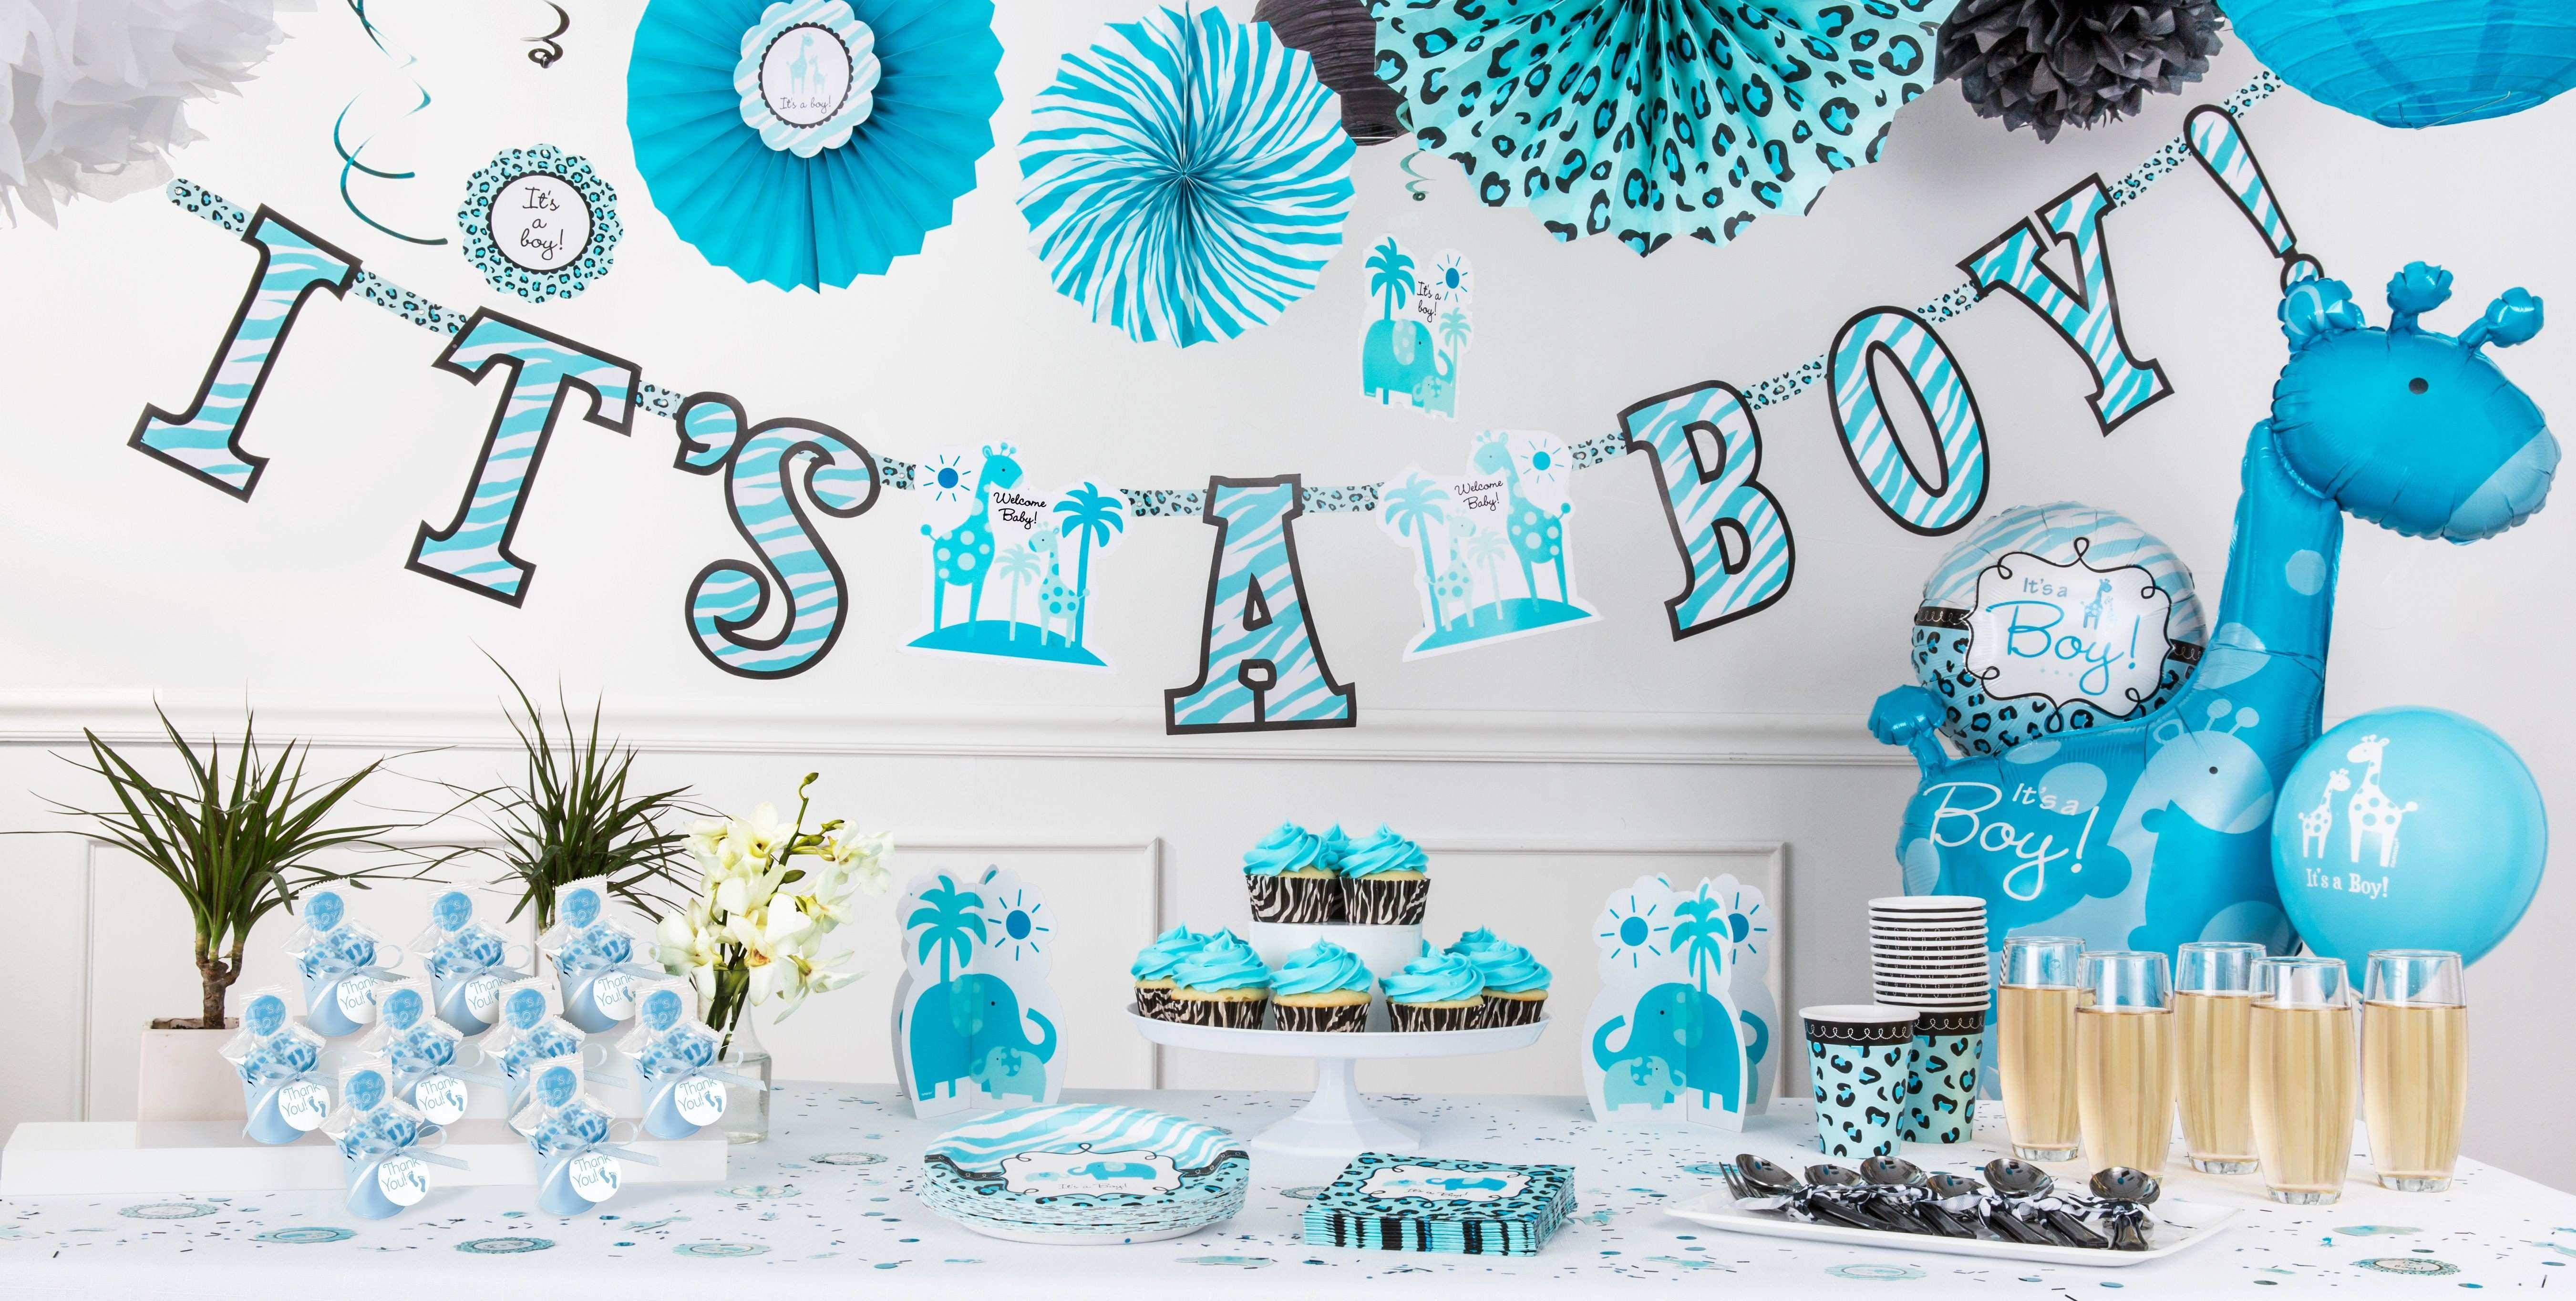 10 Beautiful Blue And White Baby Shower Ideas blue white baby shower decorations why santa claus 2024